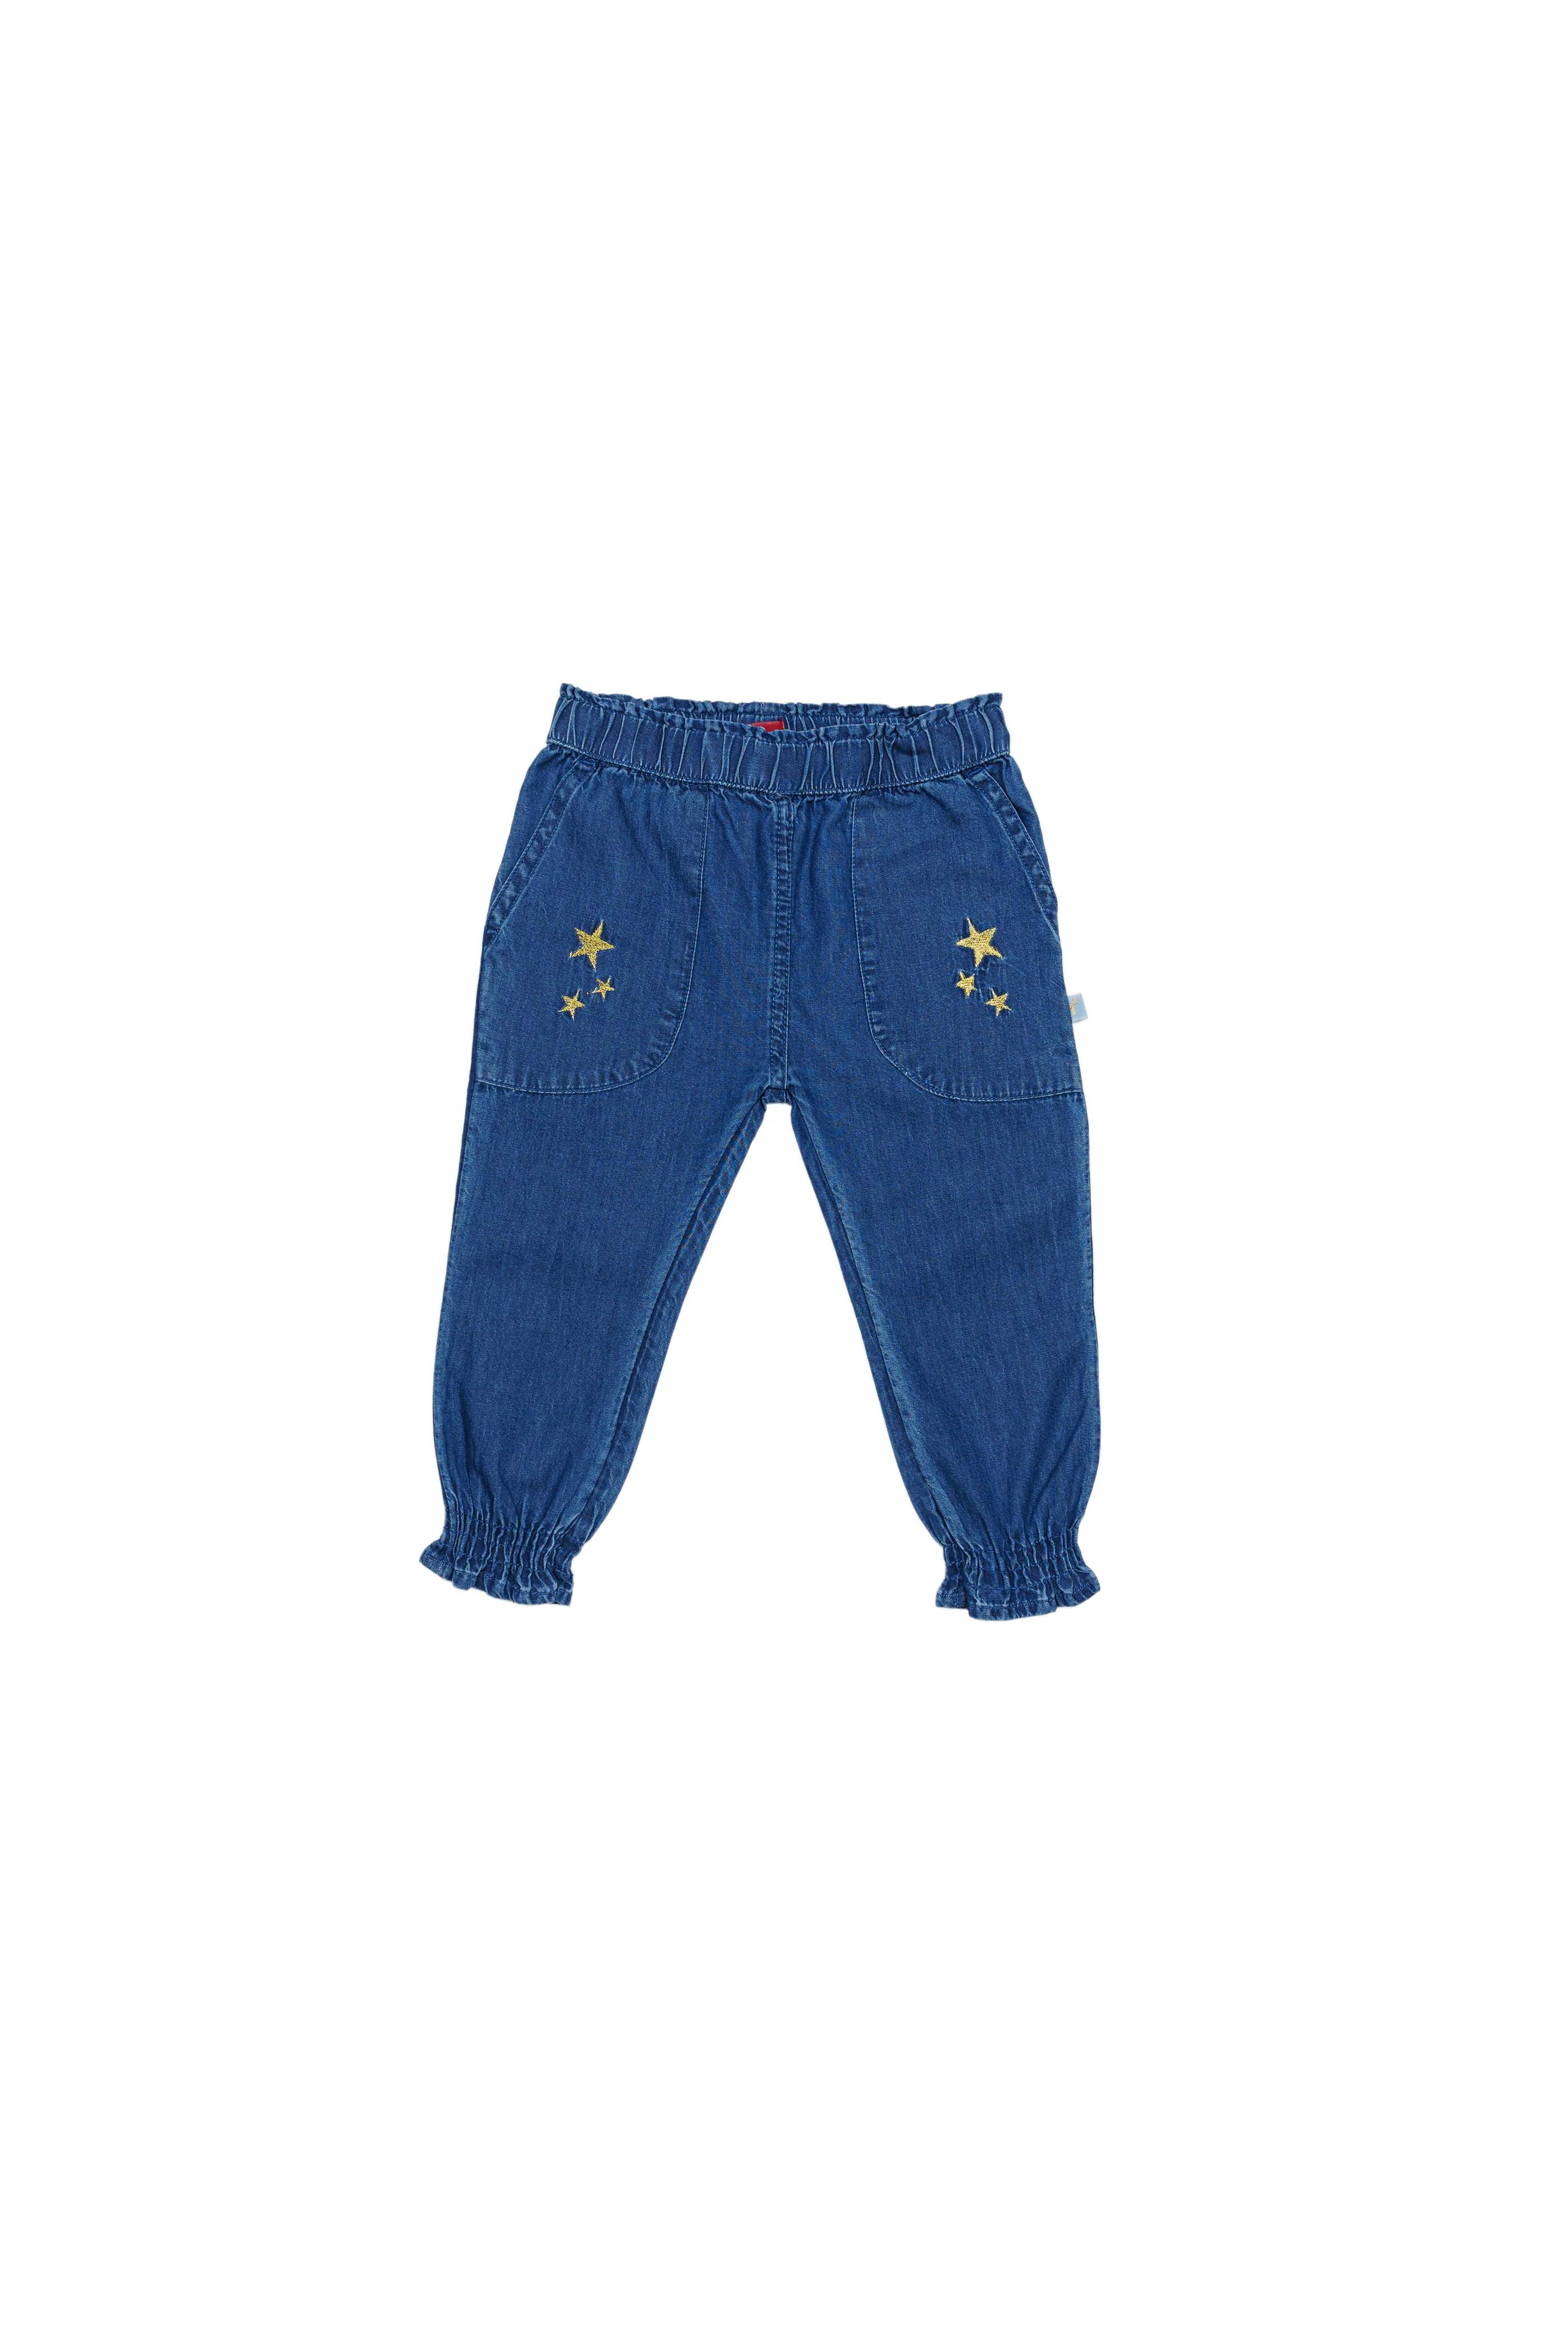 H by Hamleys Infant Girls Embroidered Blue Jogger Jeans